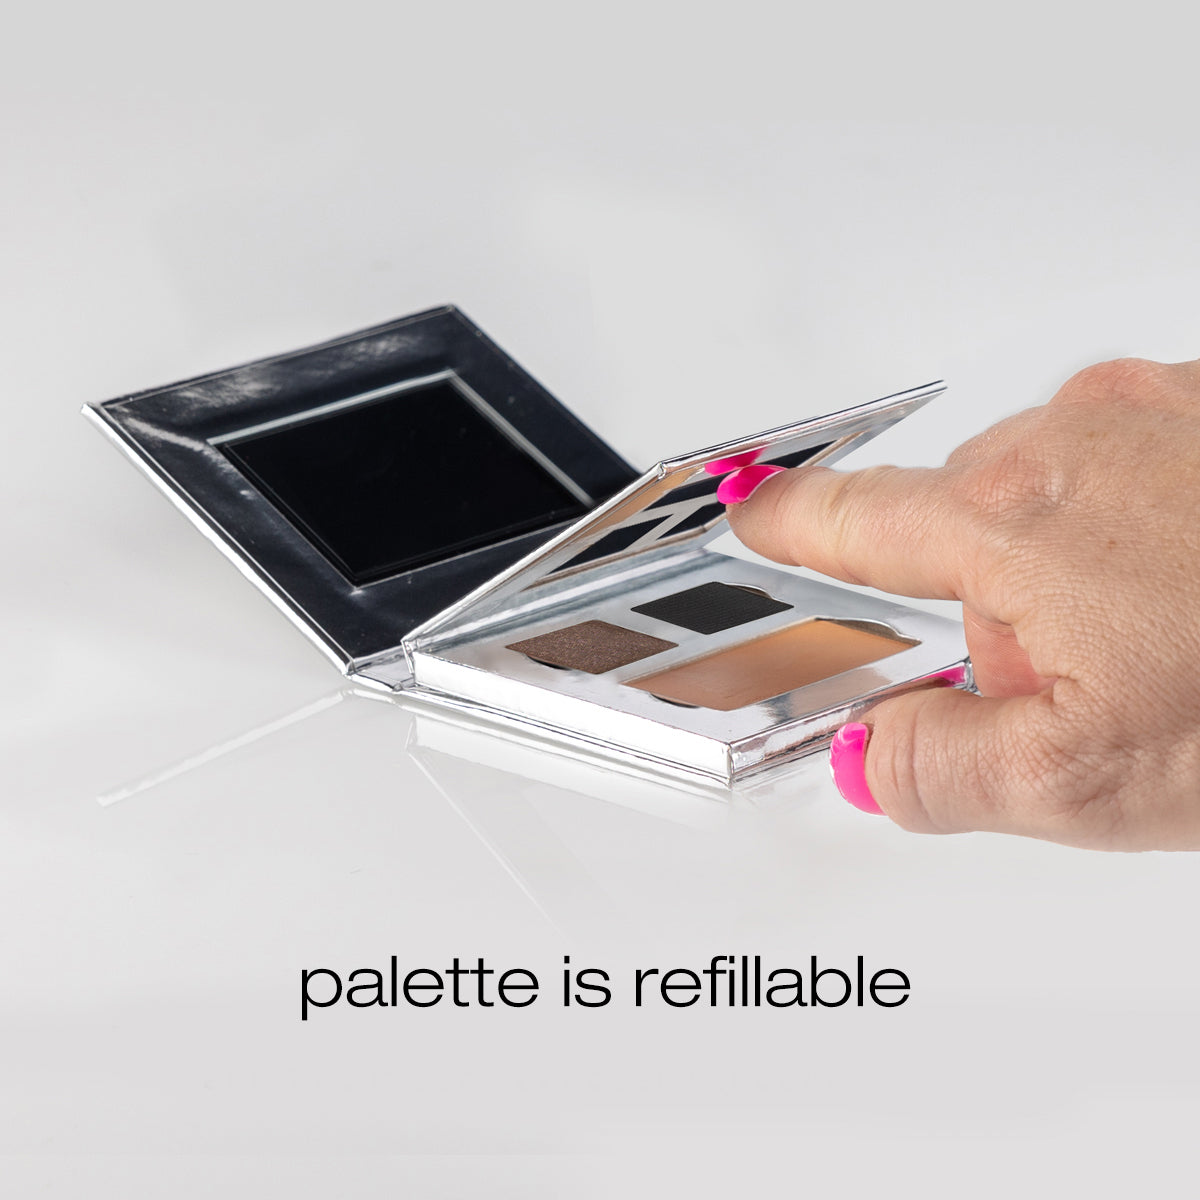 Palette is refillable